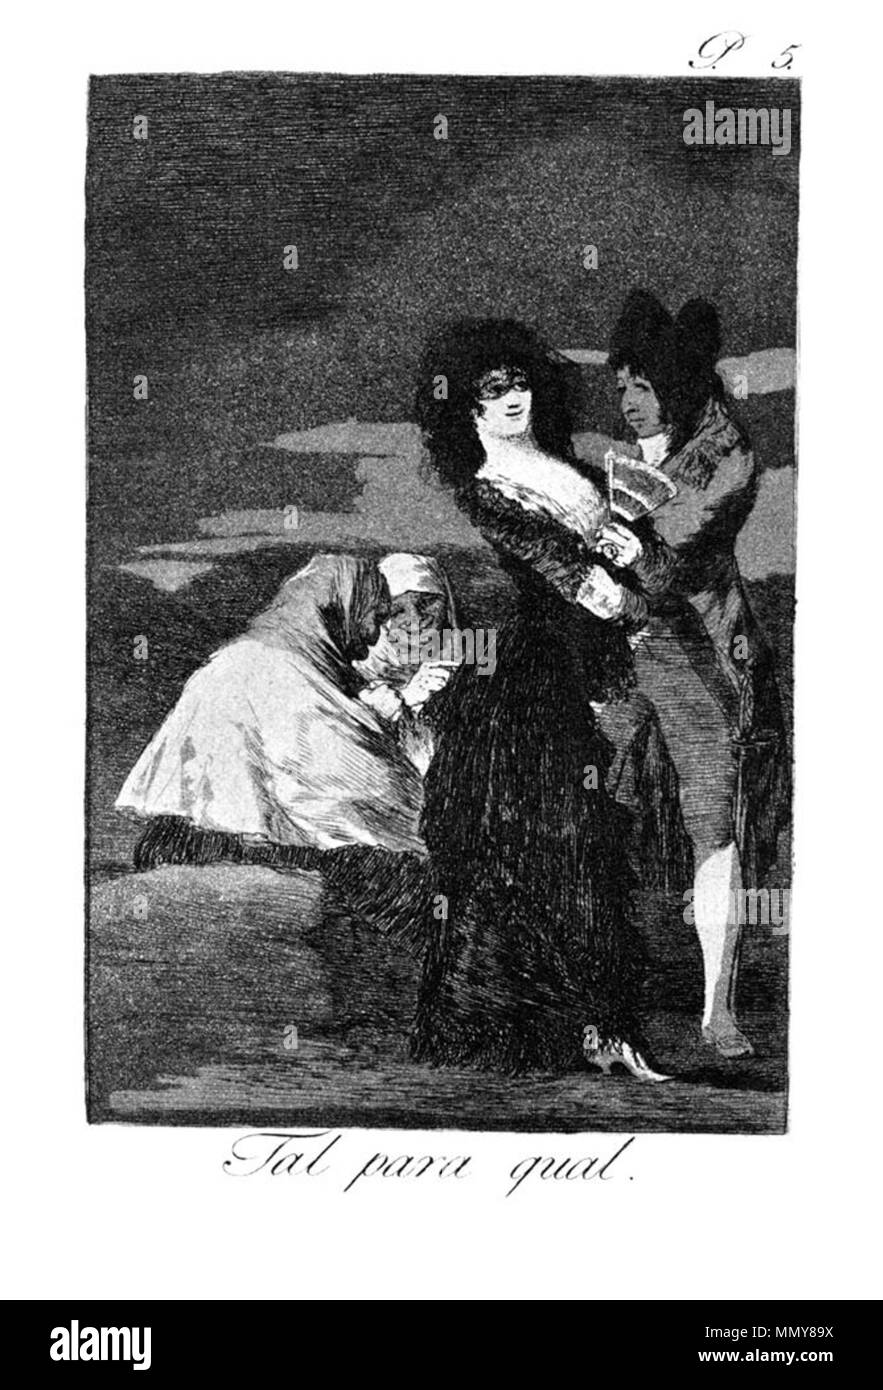 . Los Caprichos is a set of 80 aquatint prints created by Francisco Goya for release in 1799.  . 1799.   Francisco Goya  (1746–1828)      Alternative names Francisco Goya Lucientes, Francisco de Goya y Lucientes, Francisco José Goya Lucientes  Description Spanish painter, printmaker, lithographer, engraver and etcher  Date of birth/death 30 March 1746 16 April 1828  Location of birth/death Fuendetodos Bordeaux  Work location Madrid, Zaragoza, Bordeaux  Authority control  : Q5432 VIAF:?54343141 ISNI:?0000 0001 2280 1608 ULAN:?500118936 LCCN:?n79003363 NLA:?36545788 WorldCat Goya - Caprichos (05 Stock Photo